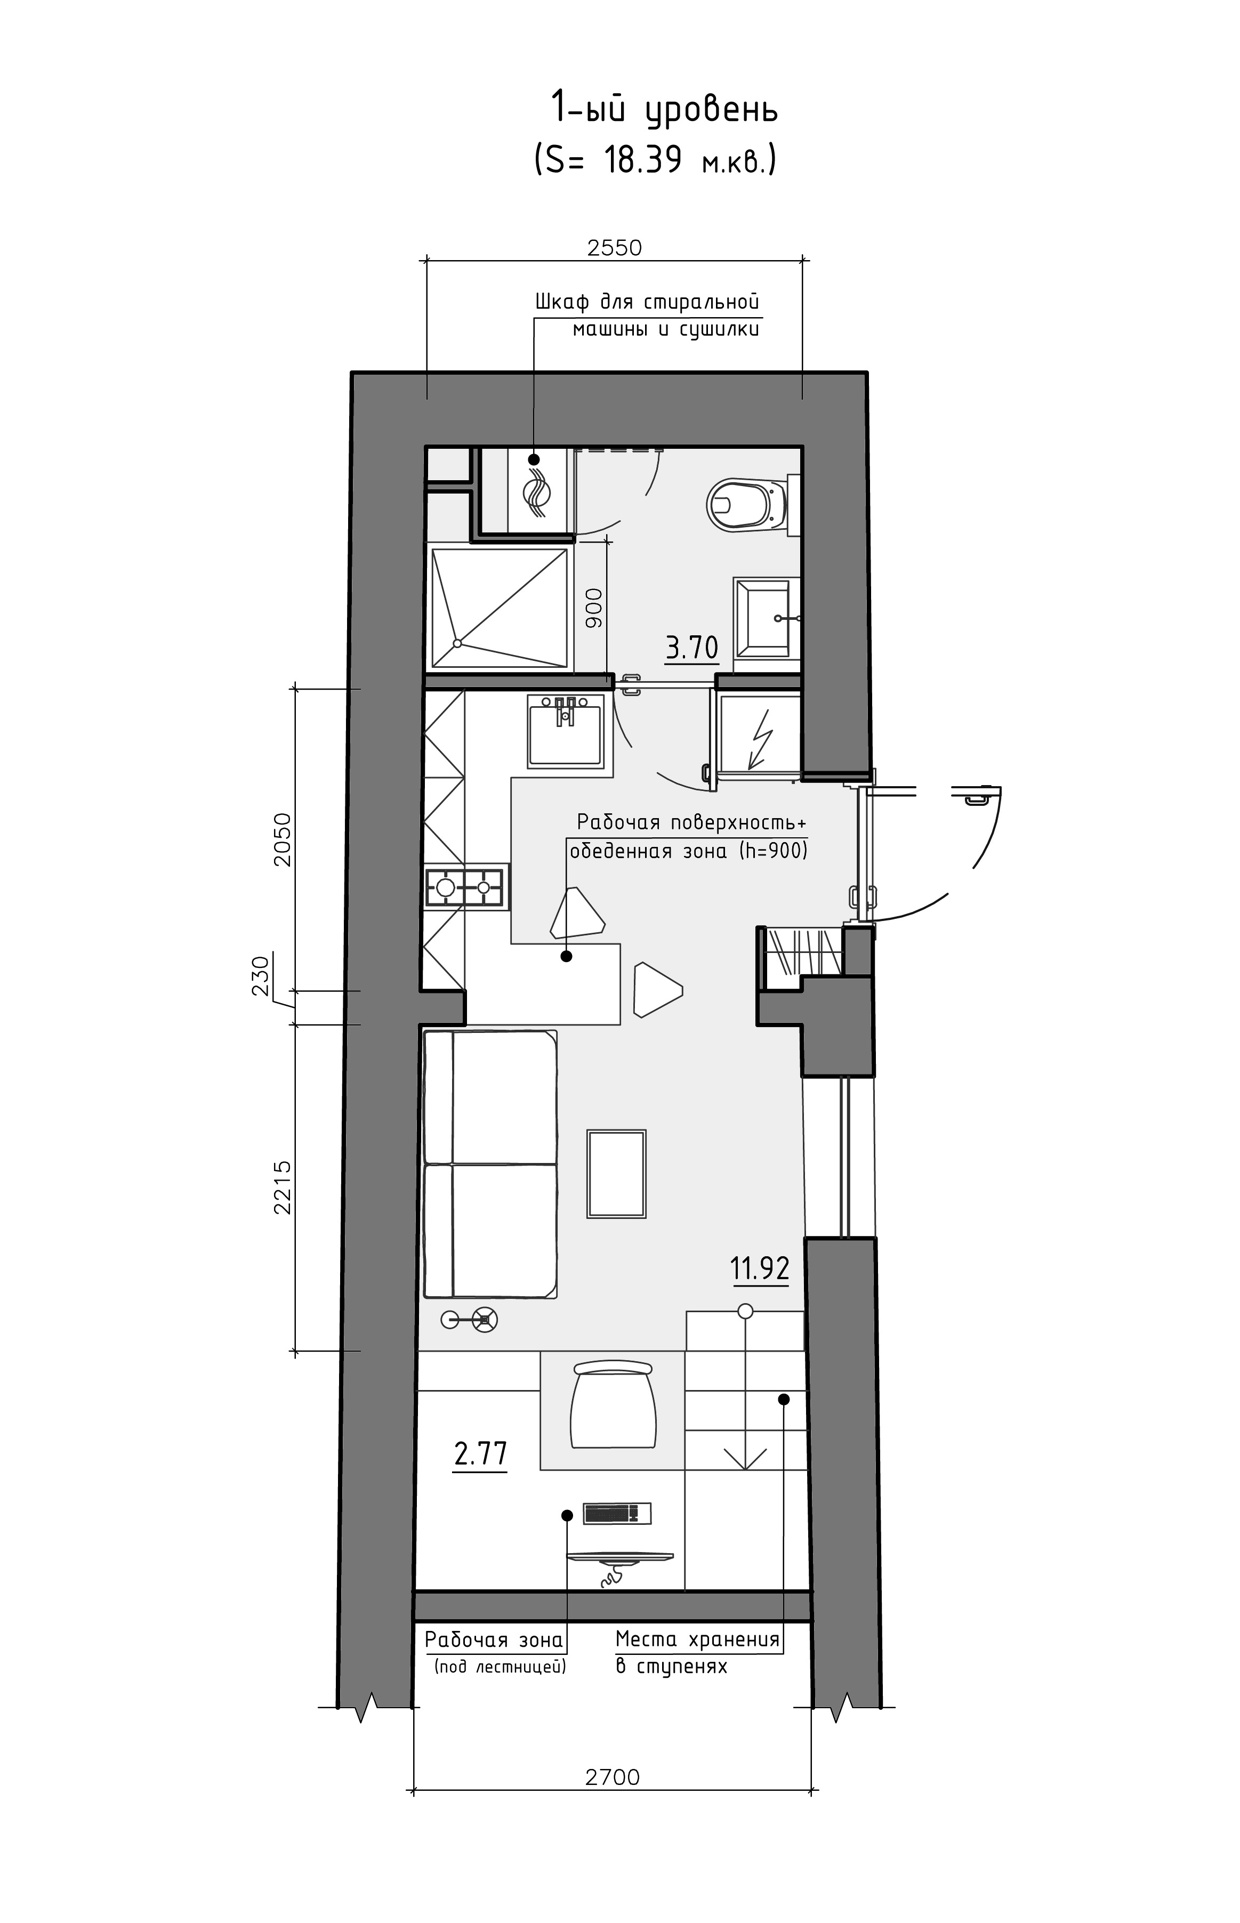 residential house reconstruction with addition of a mansard floor plan 8 Tiny Loft Space Apartment